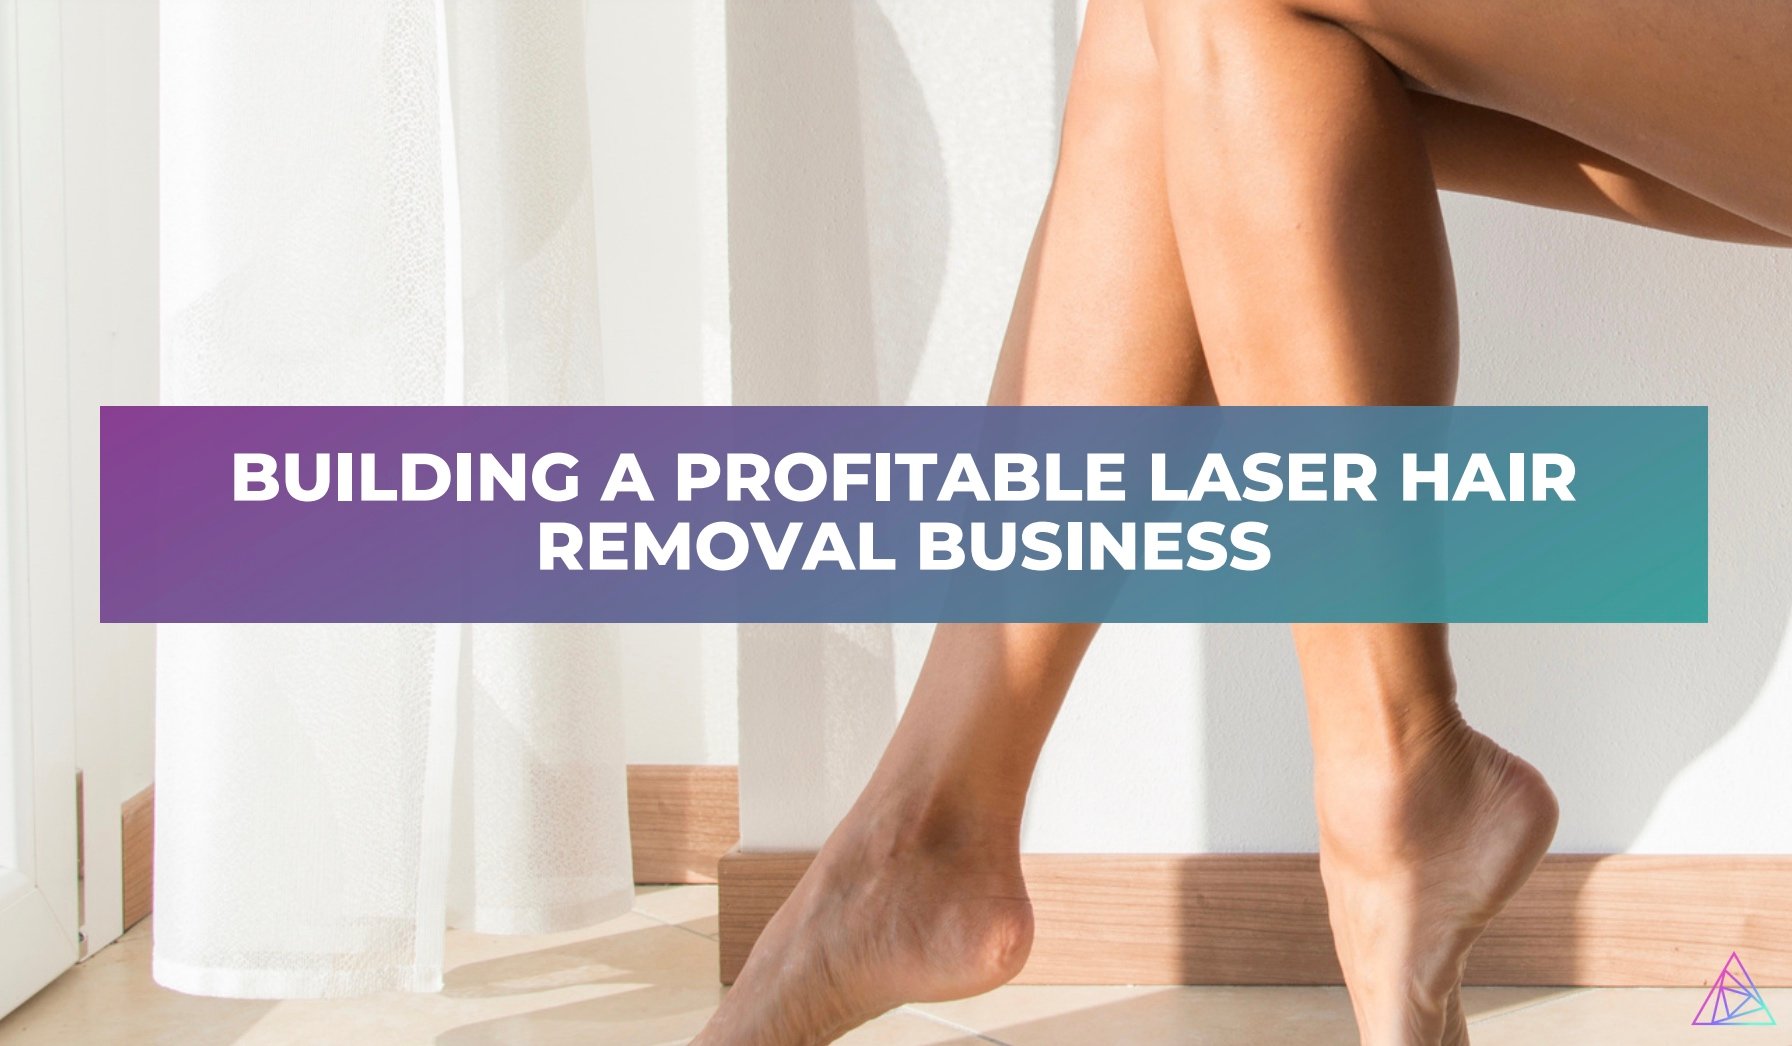 laser hair removal business plan example